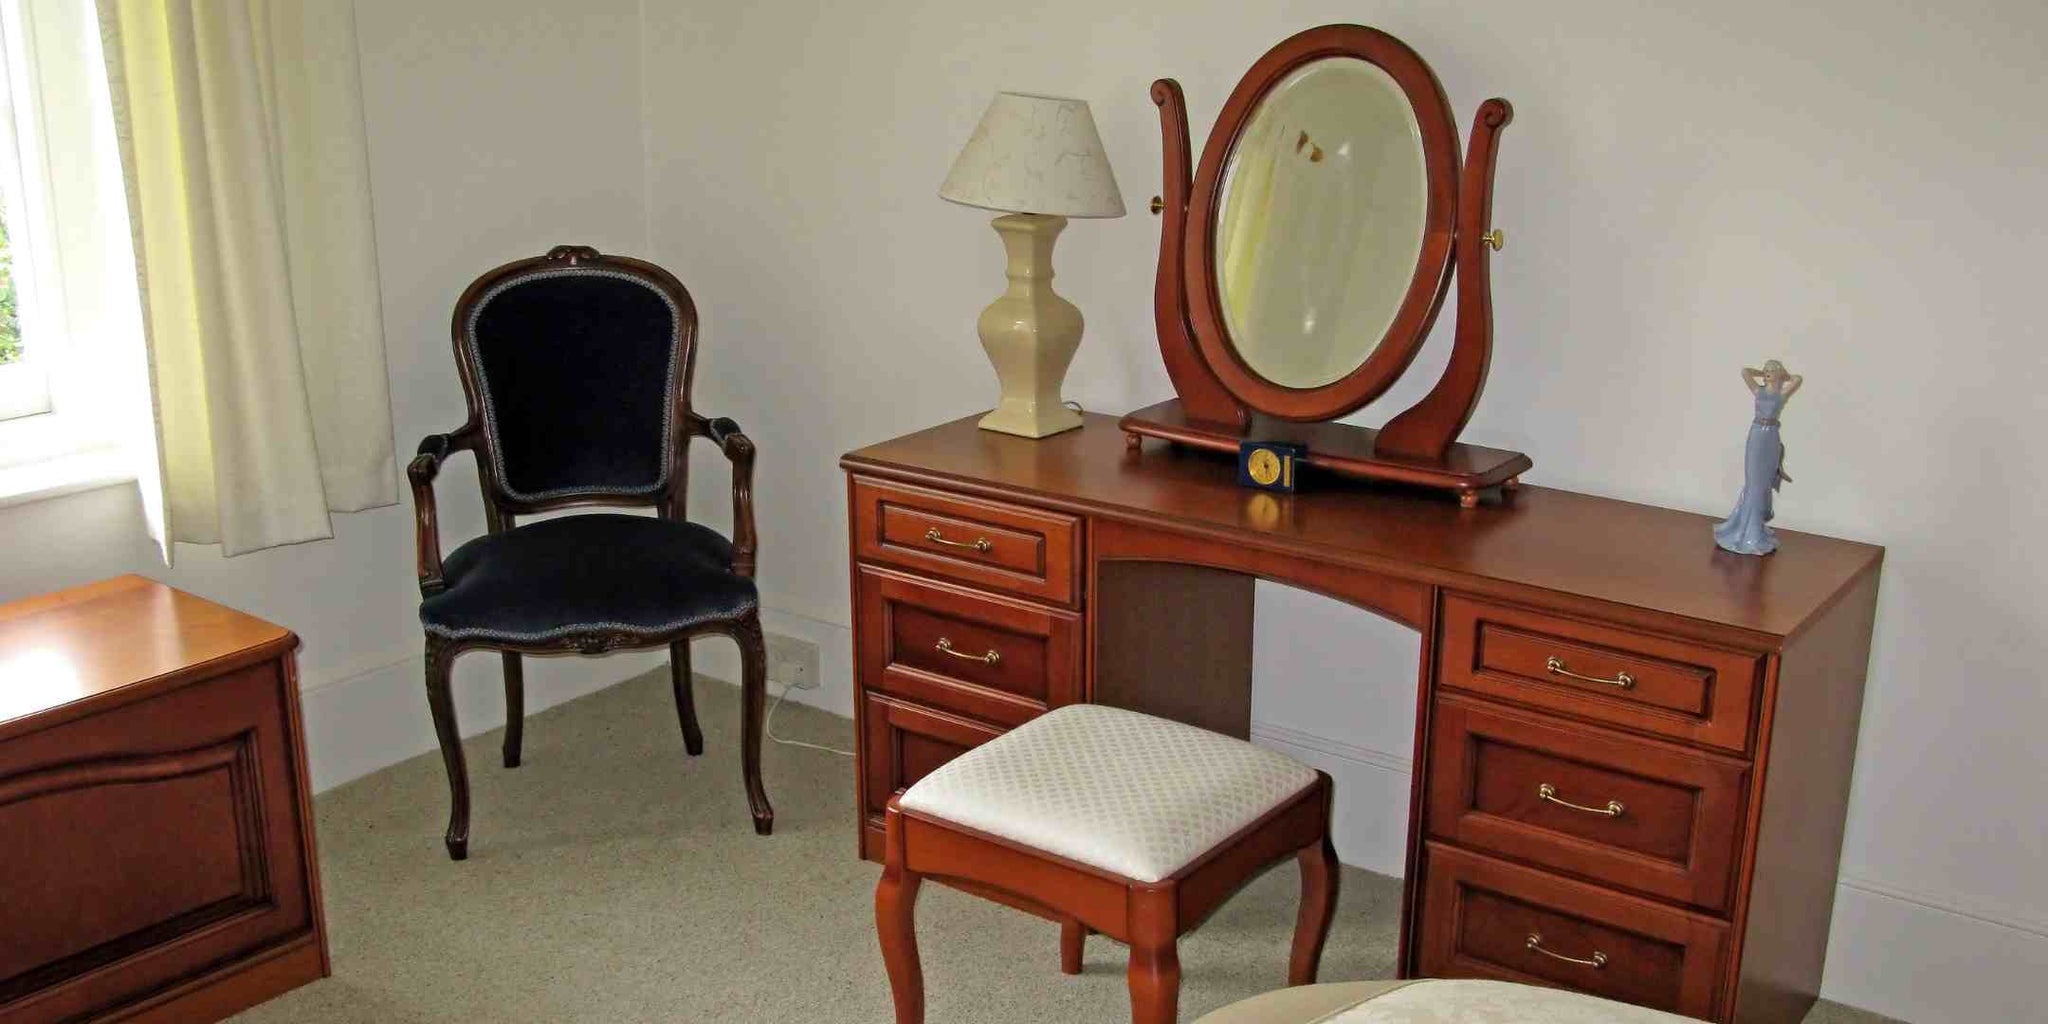 Wooden Dressing Table with a Mirror